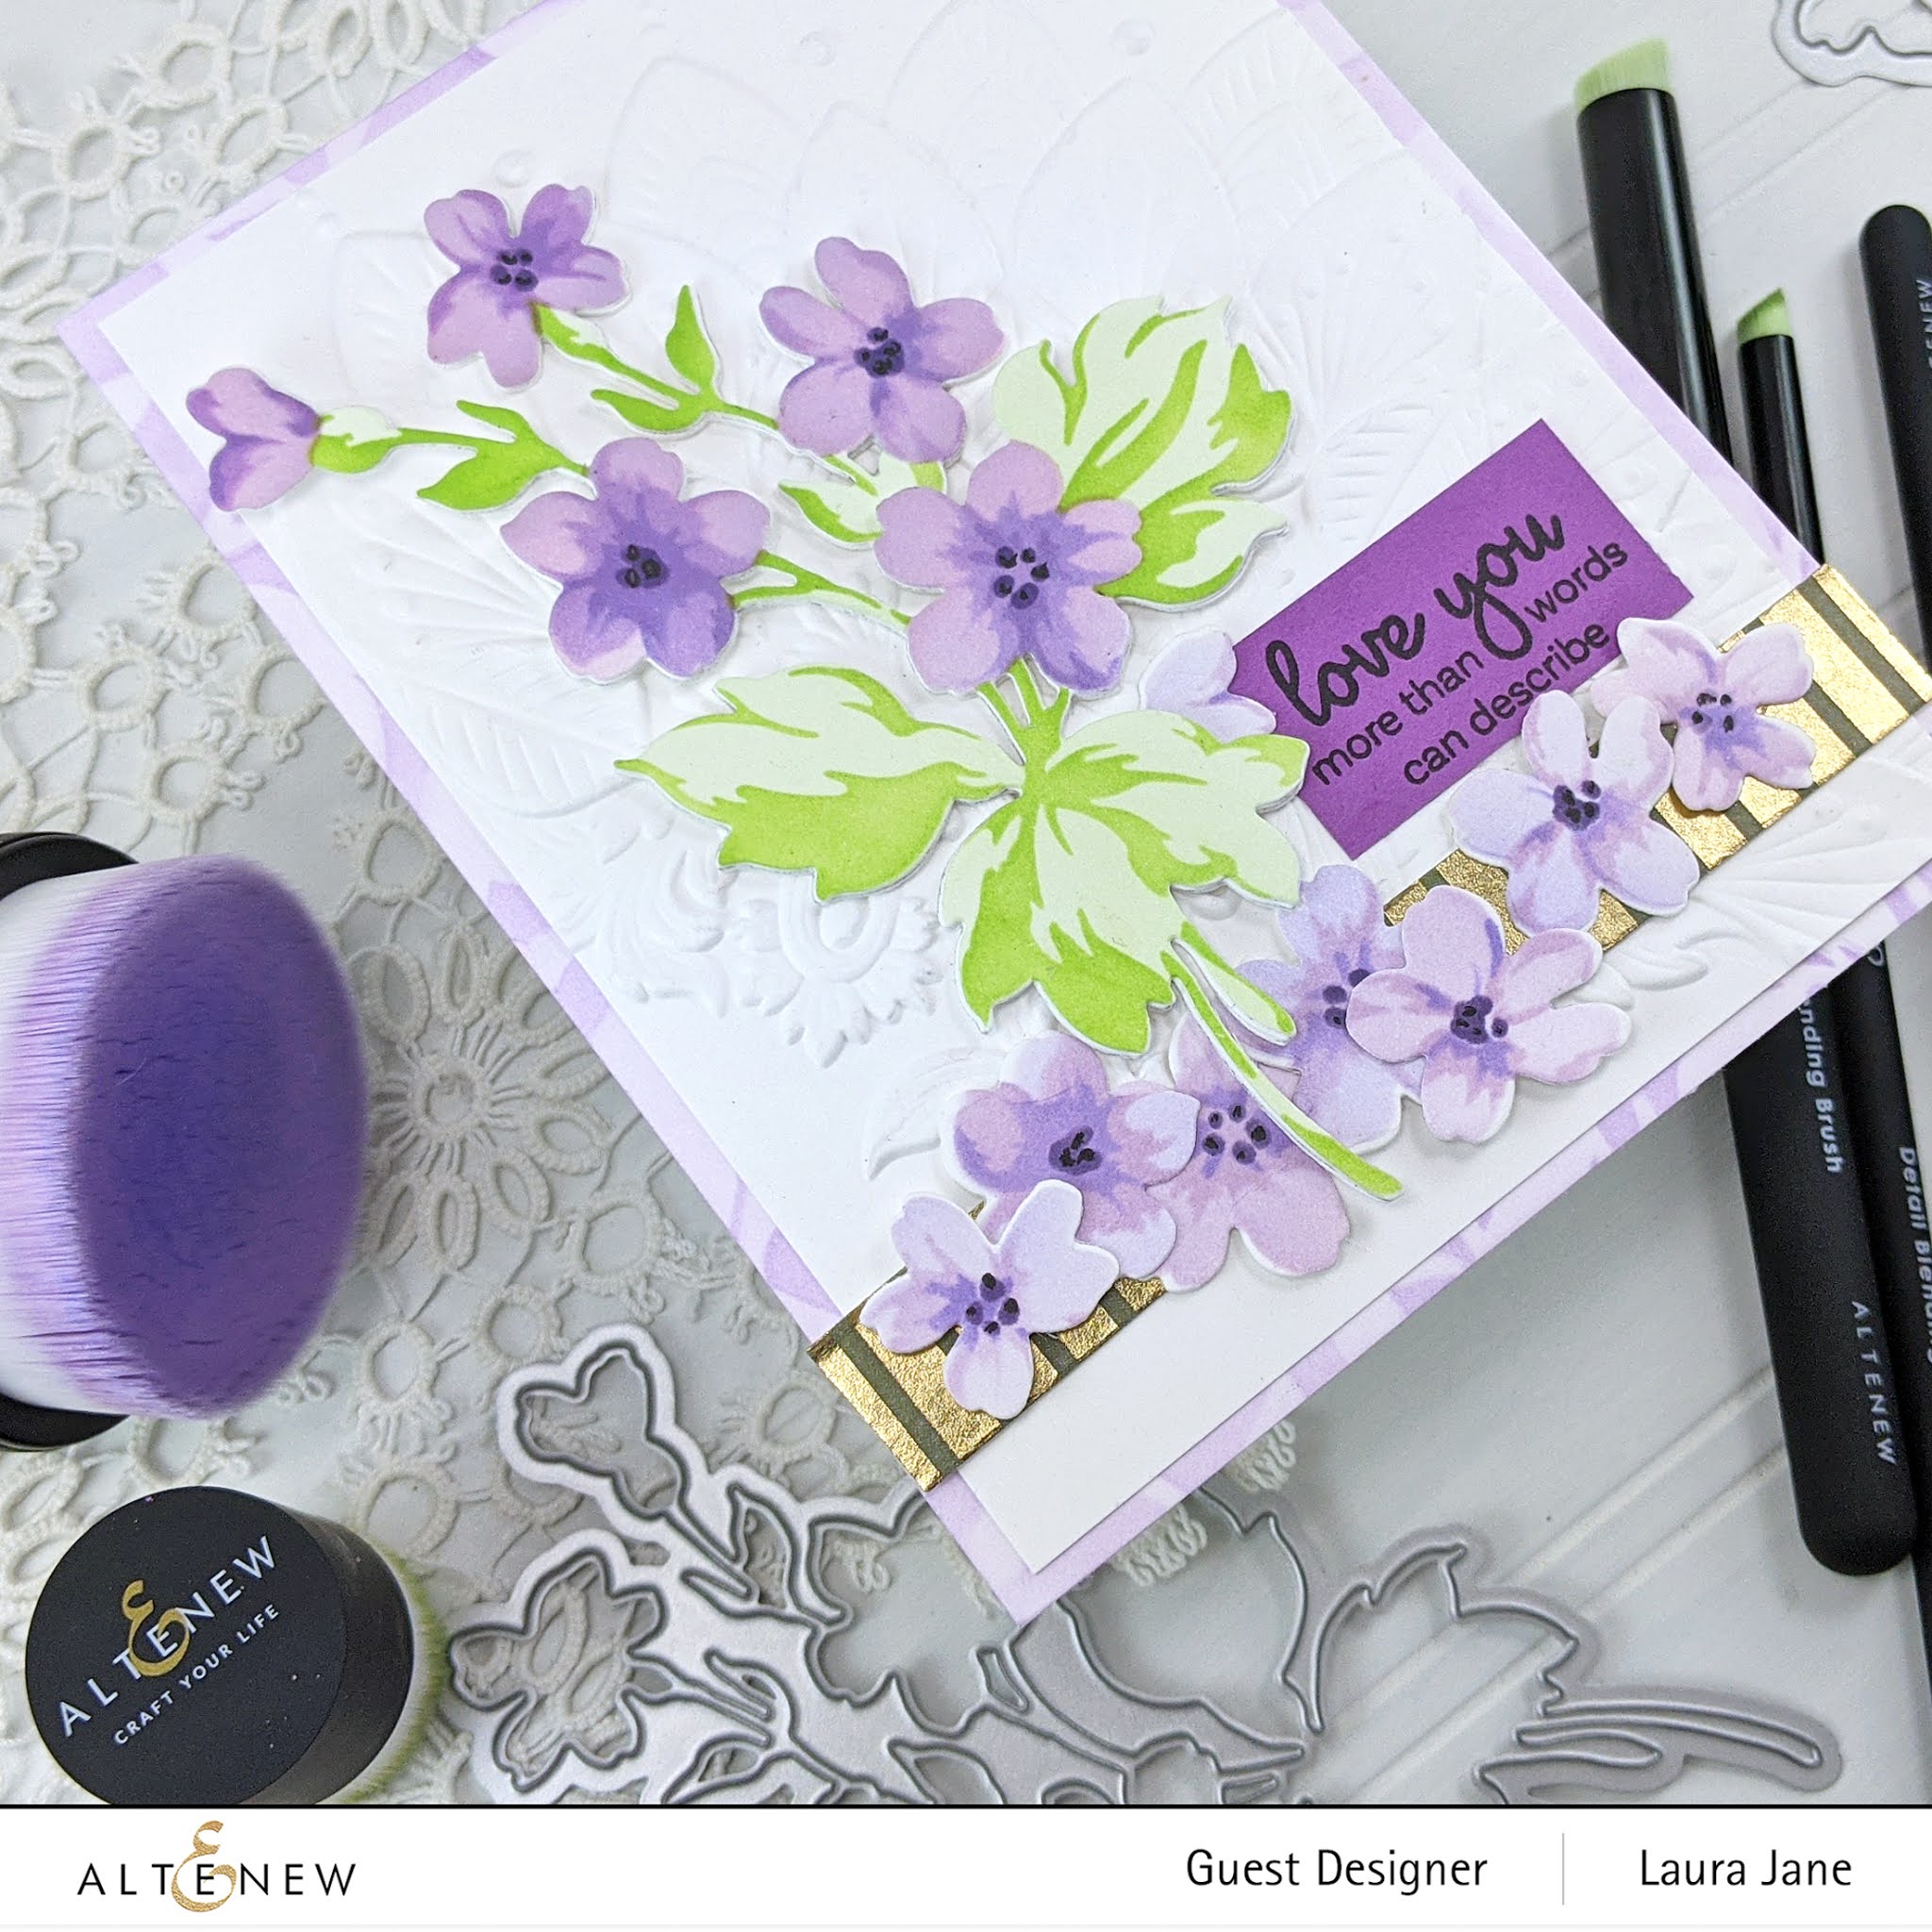 After-Hours Ink & Flowers: Altenew Whimsical Wonder Stamps/Dies ...